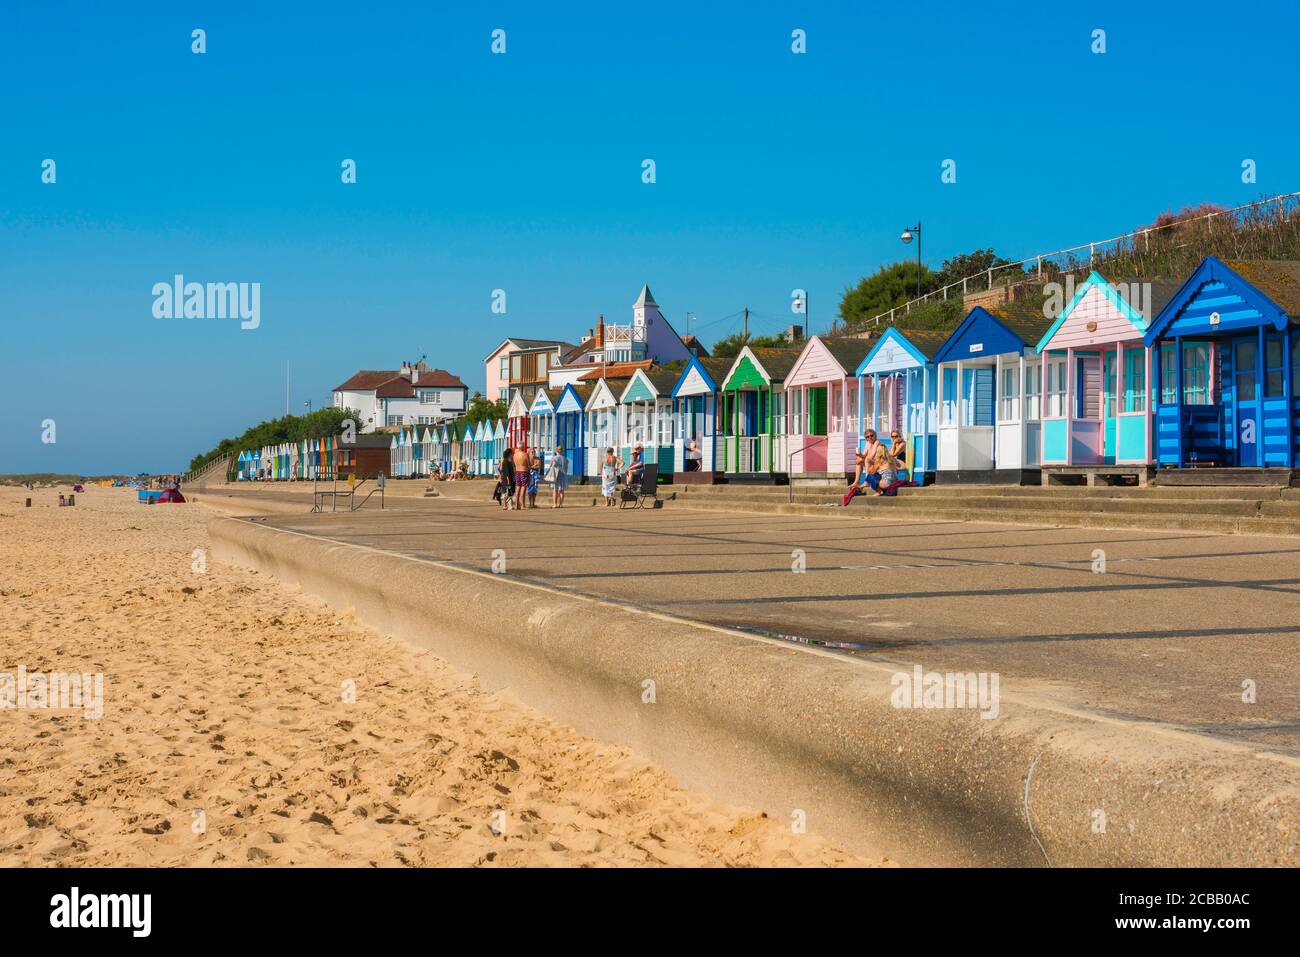 Suffolk coast UK, view in summer of people sitting outside colourful beach huts along the seafront in Southwold on the Suffolk coast, England, UK Stock Photo